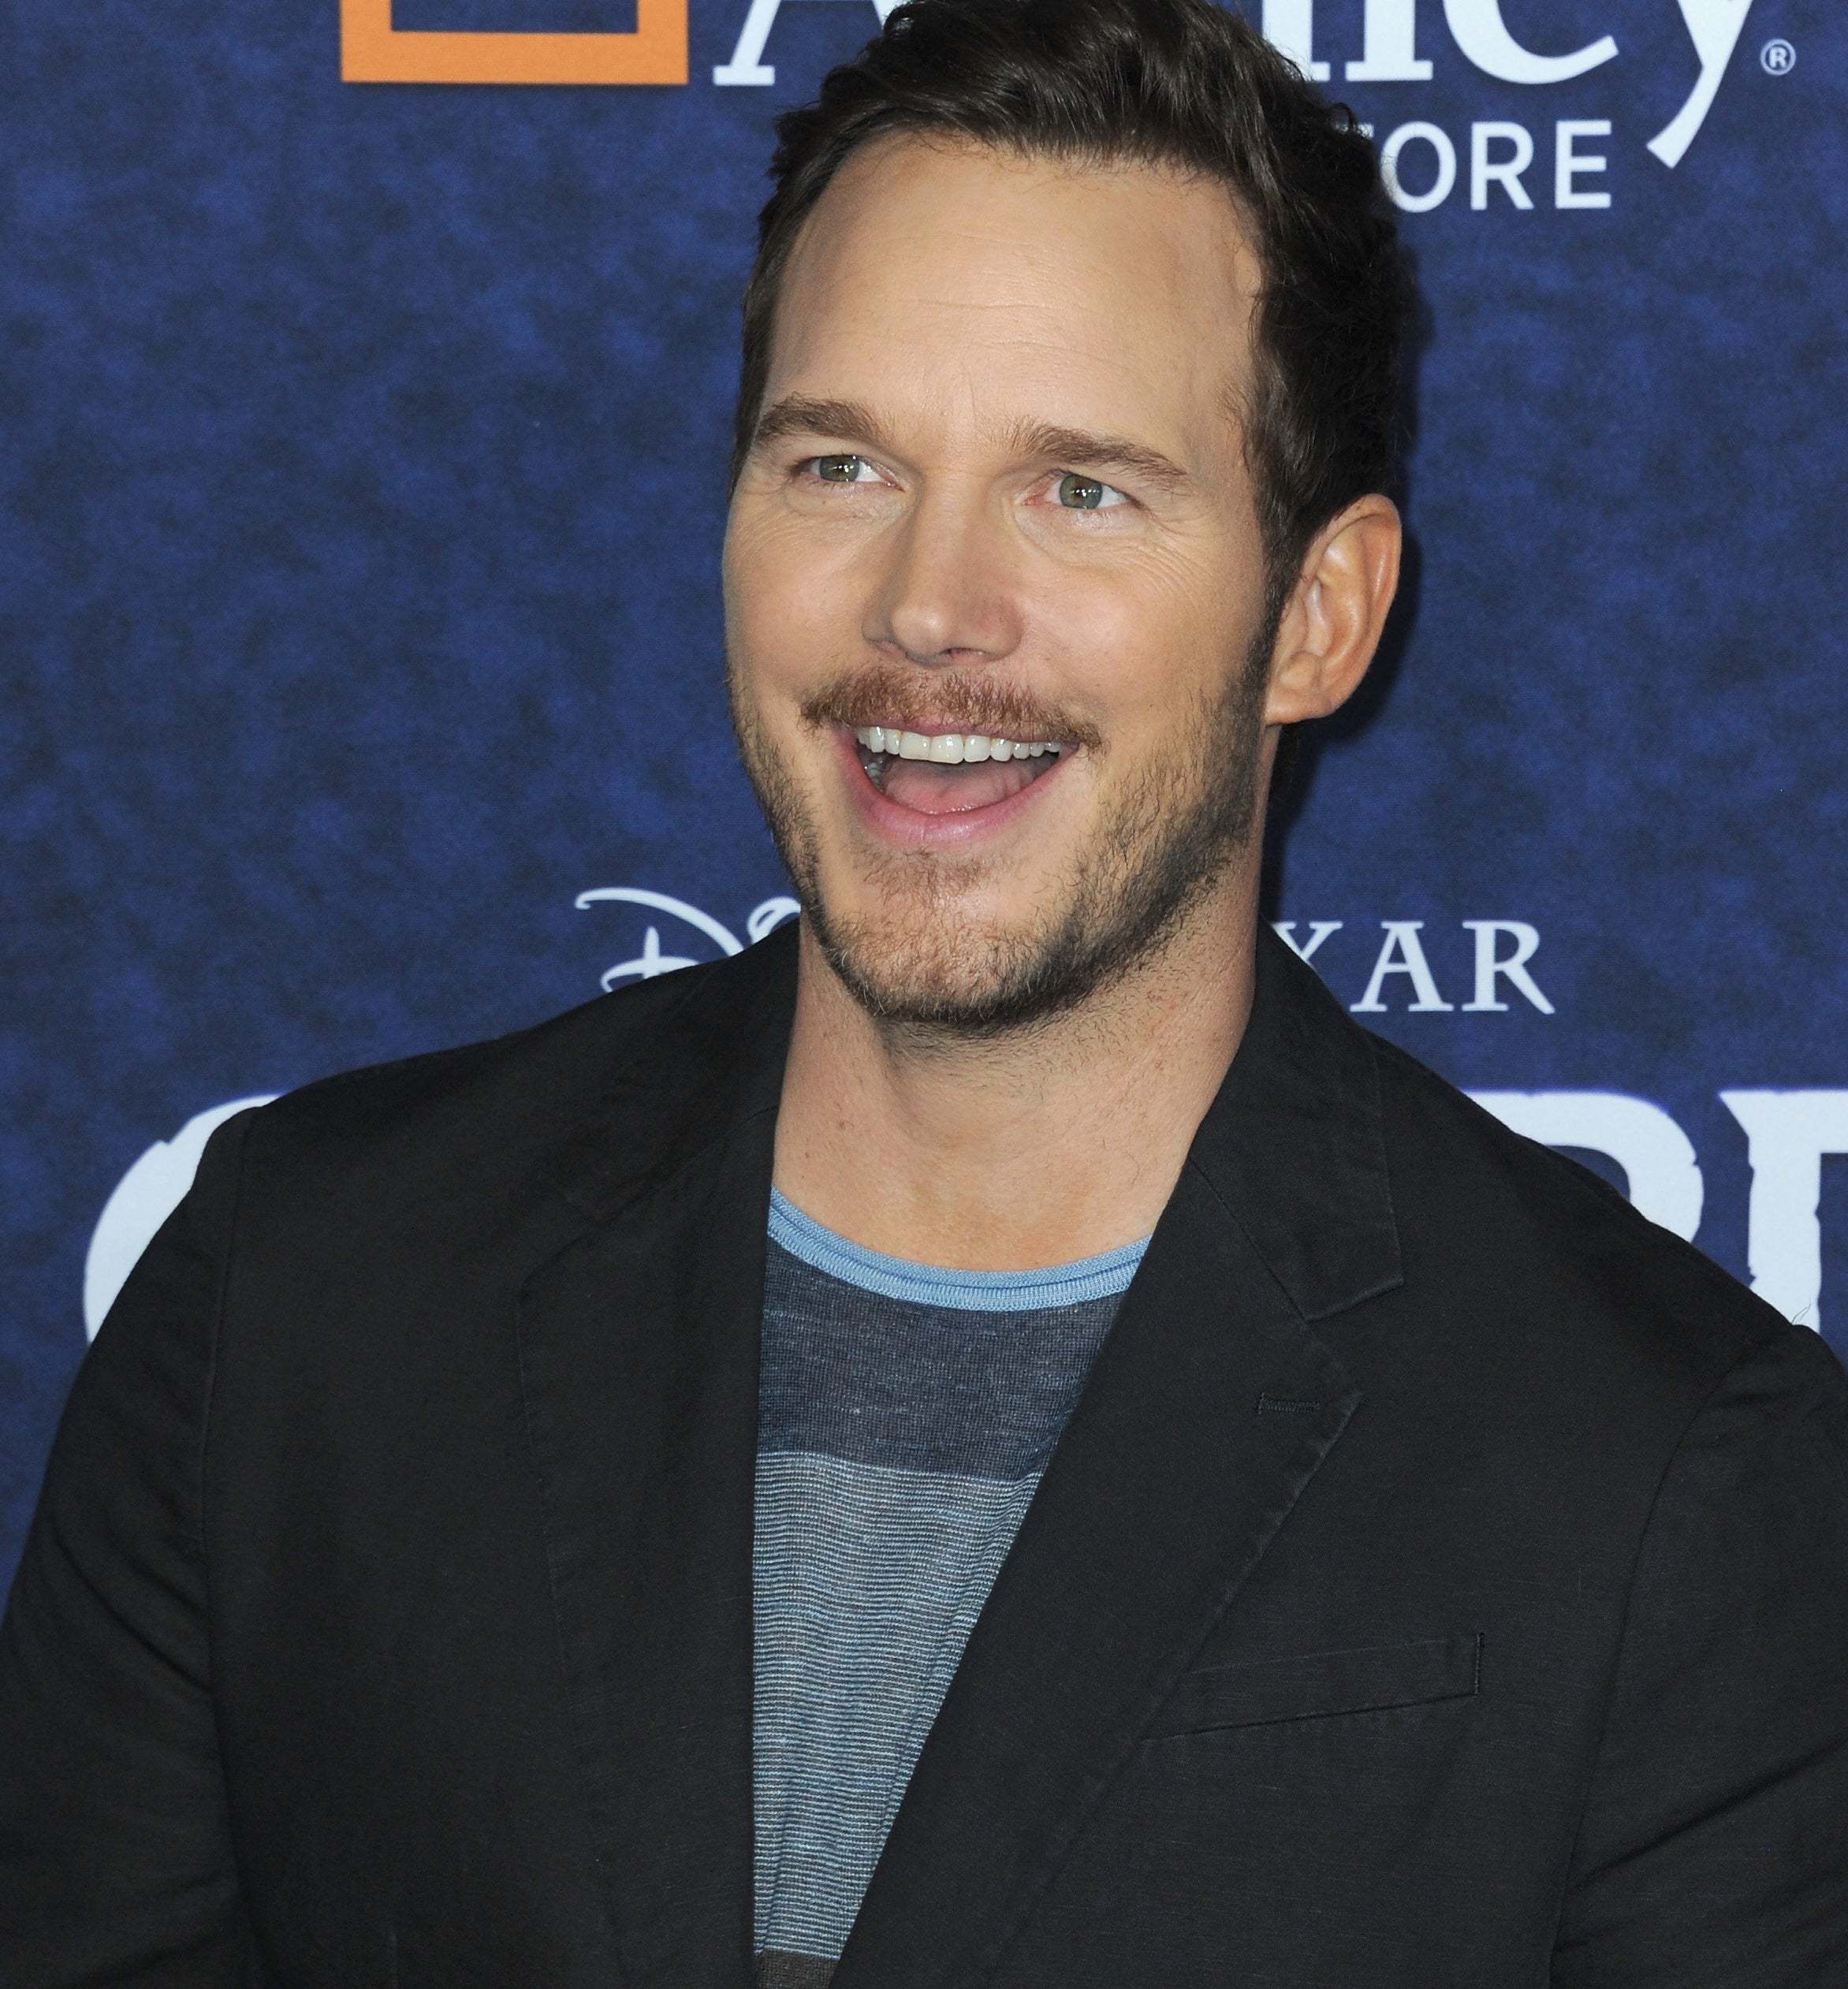 Chris Pratt laughing at an event in 2011